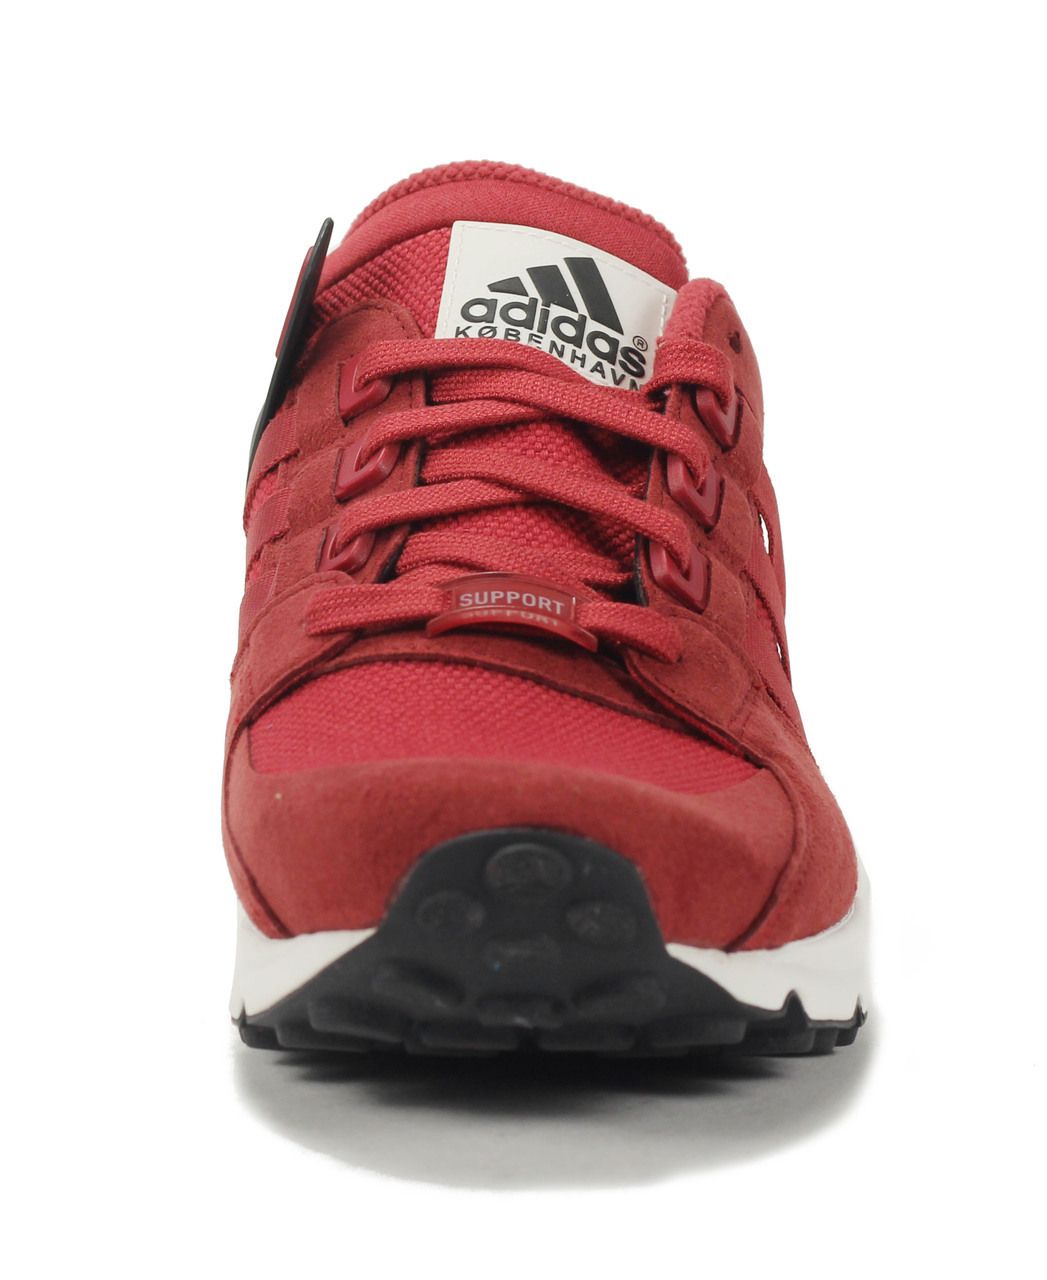 Adidas for Men: Equipment Running Support Red Sneaker Red